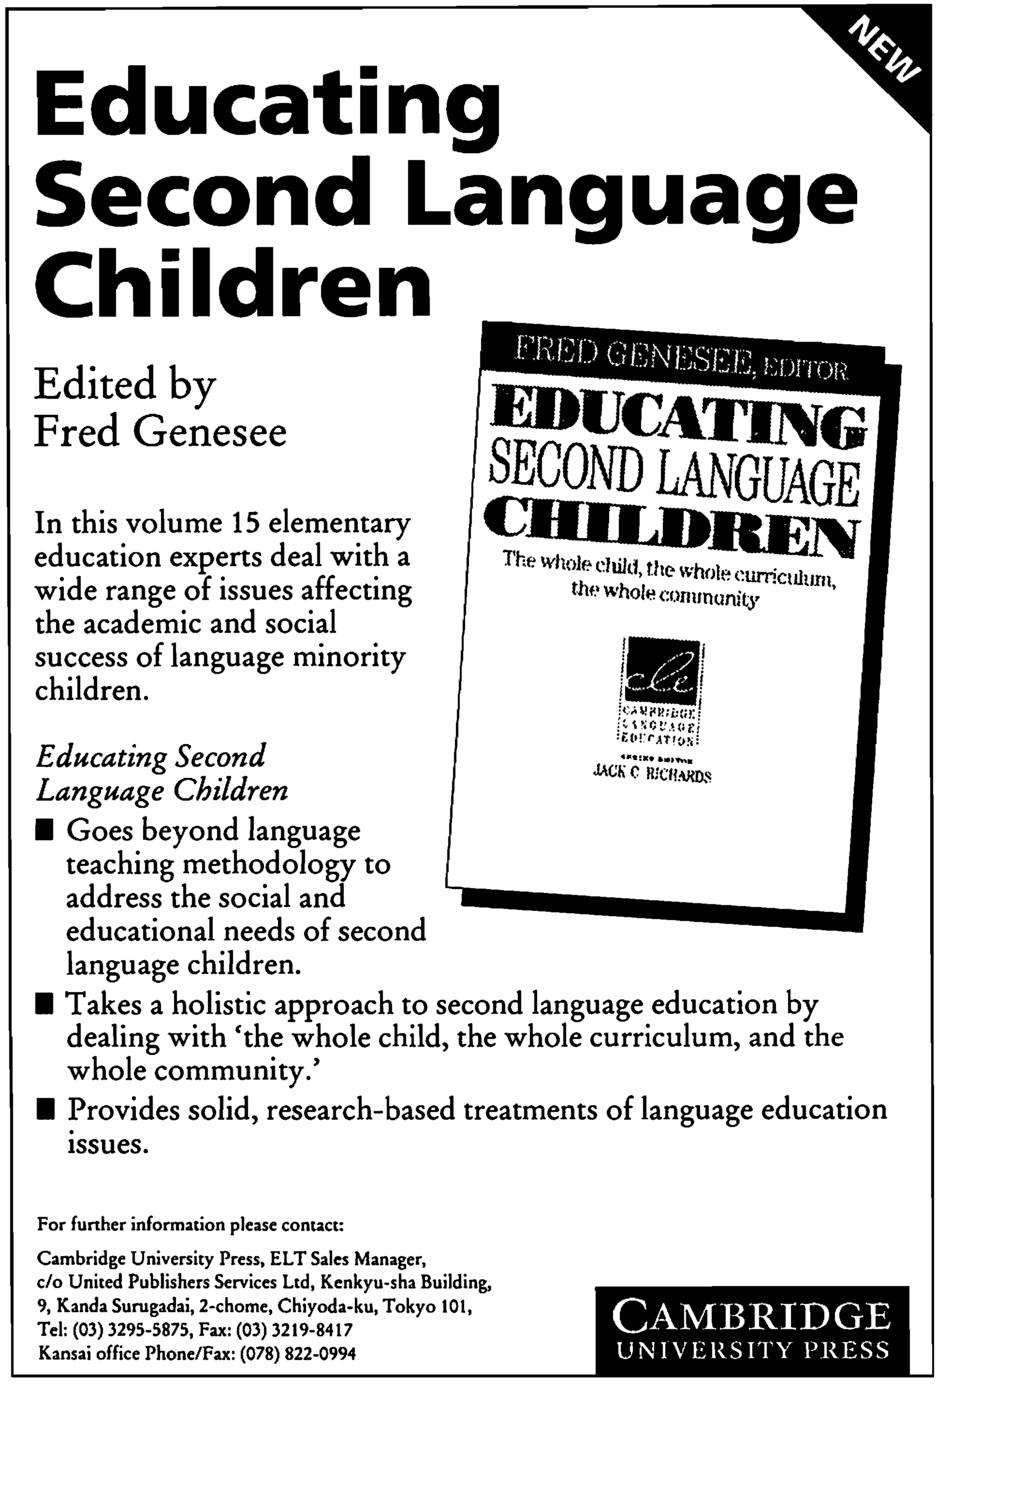 Educating Second Language Children Edited by Fred Genesee In this volume 15 elementary education experts deal with a wide range of issues affecting the academic and social success of language